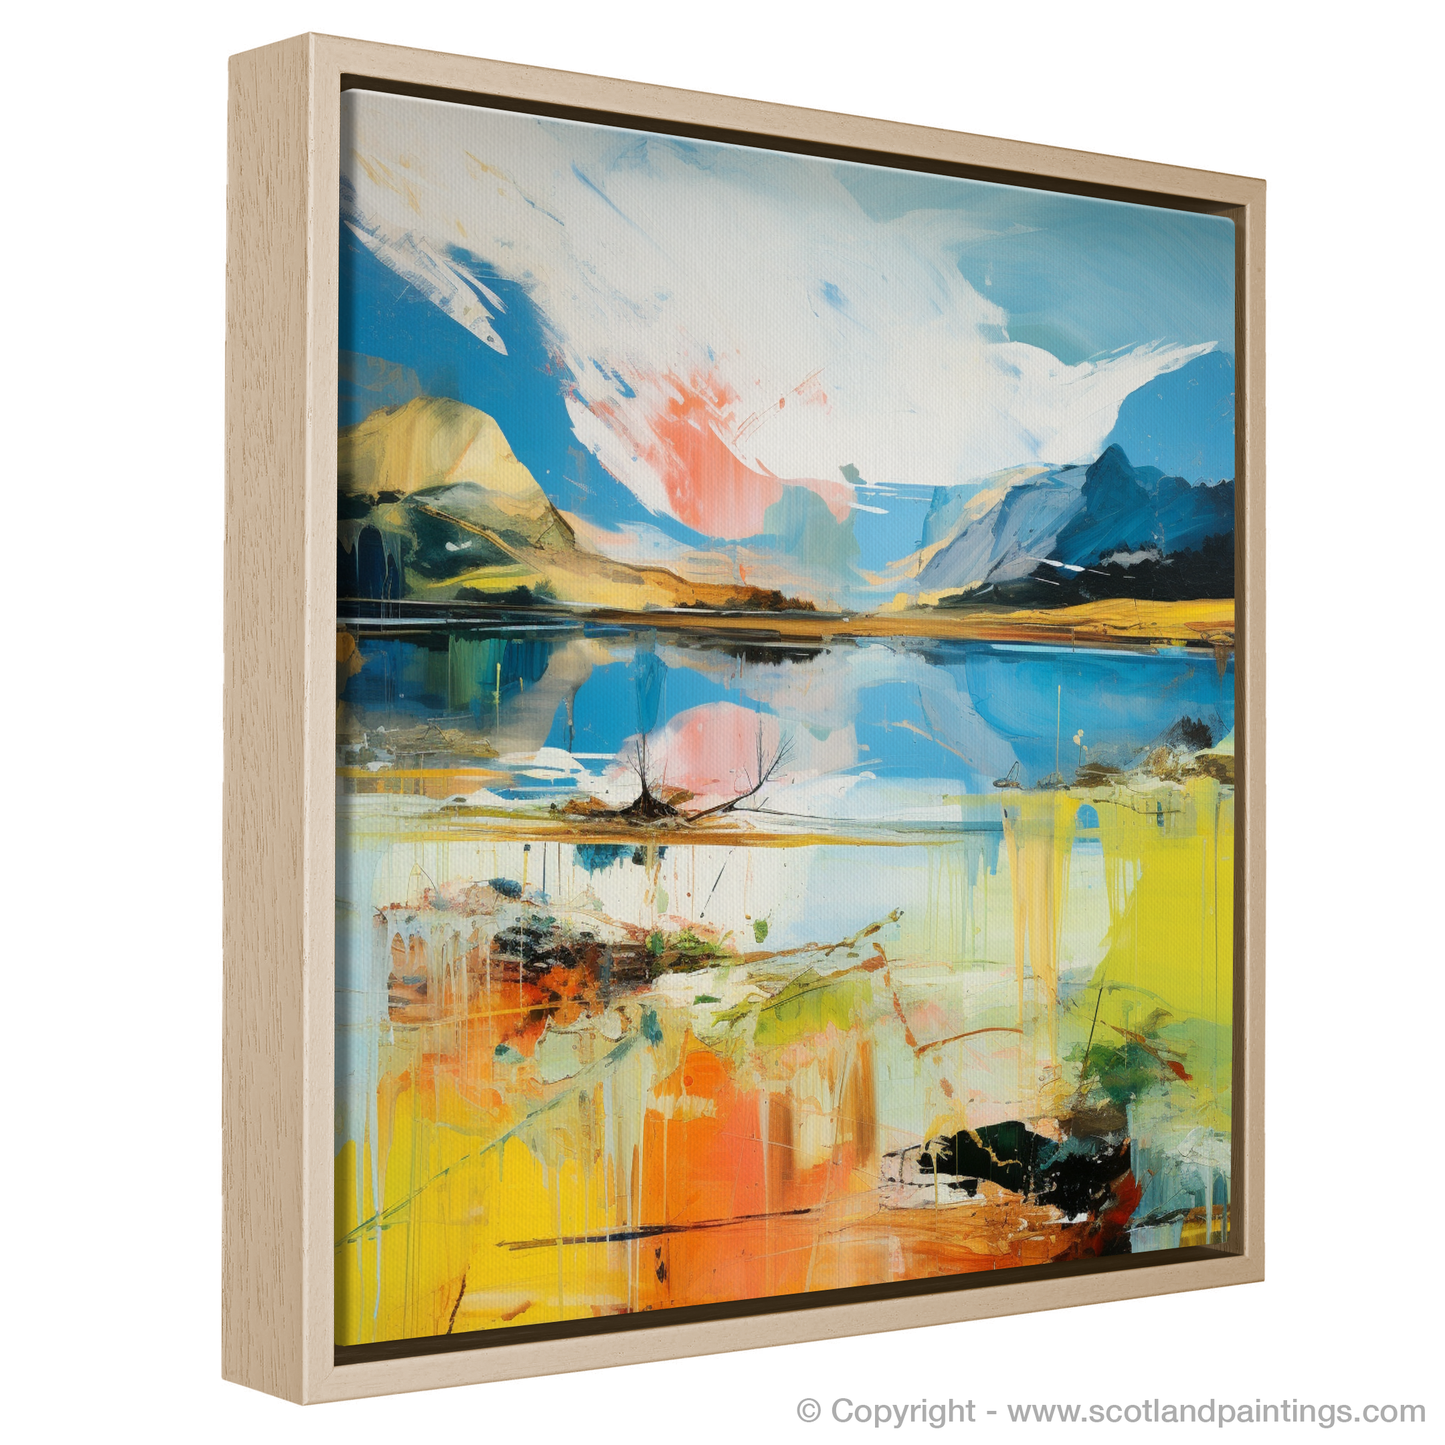 Painting and Art Print of Loch Awe, Argyll and Bute in summer entitled "Summer Essence of Loch Awe".